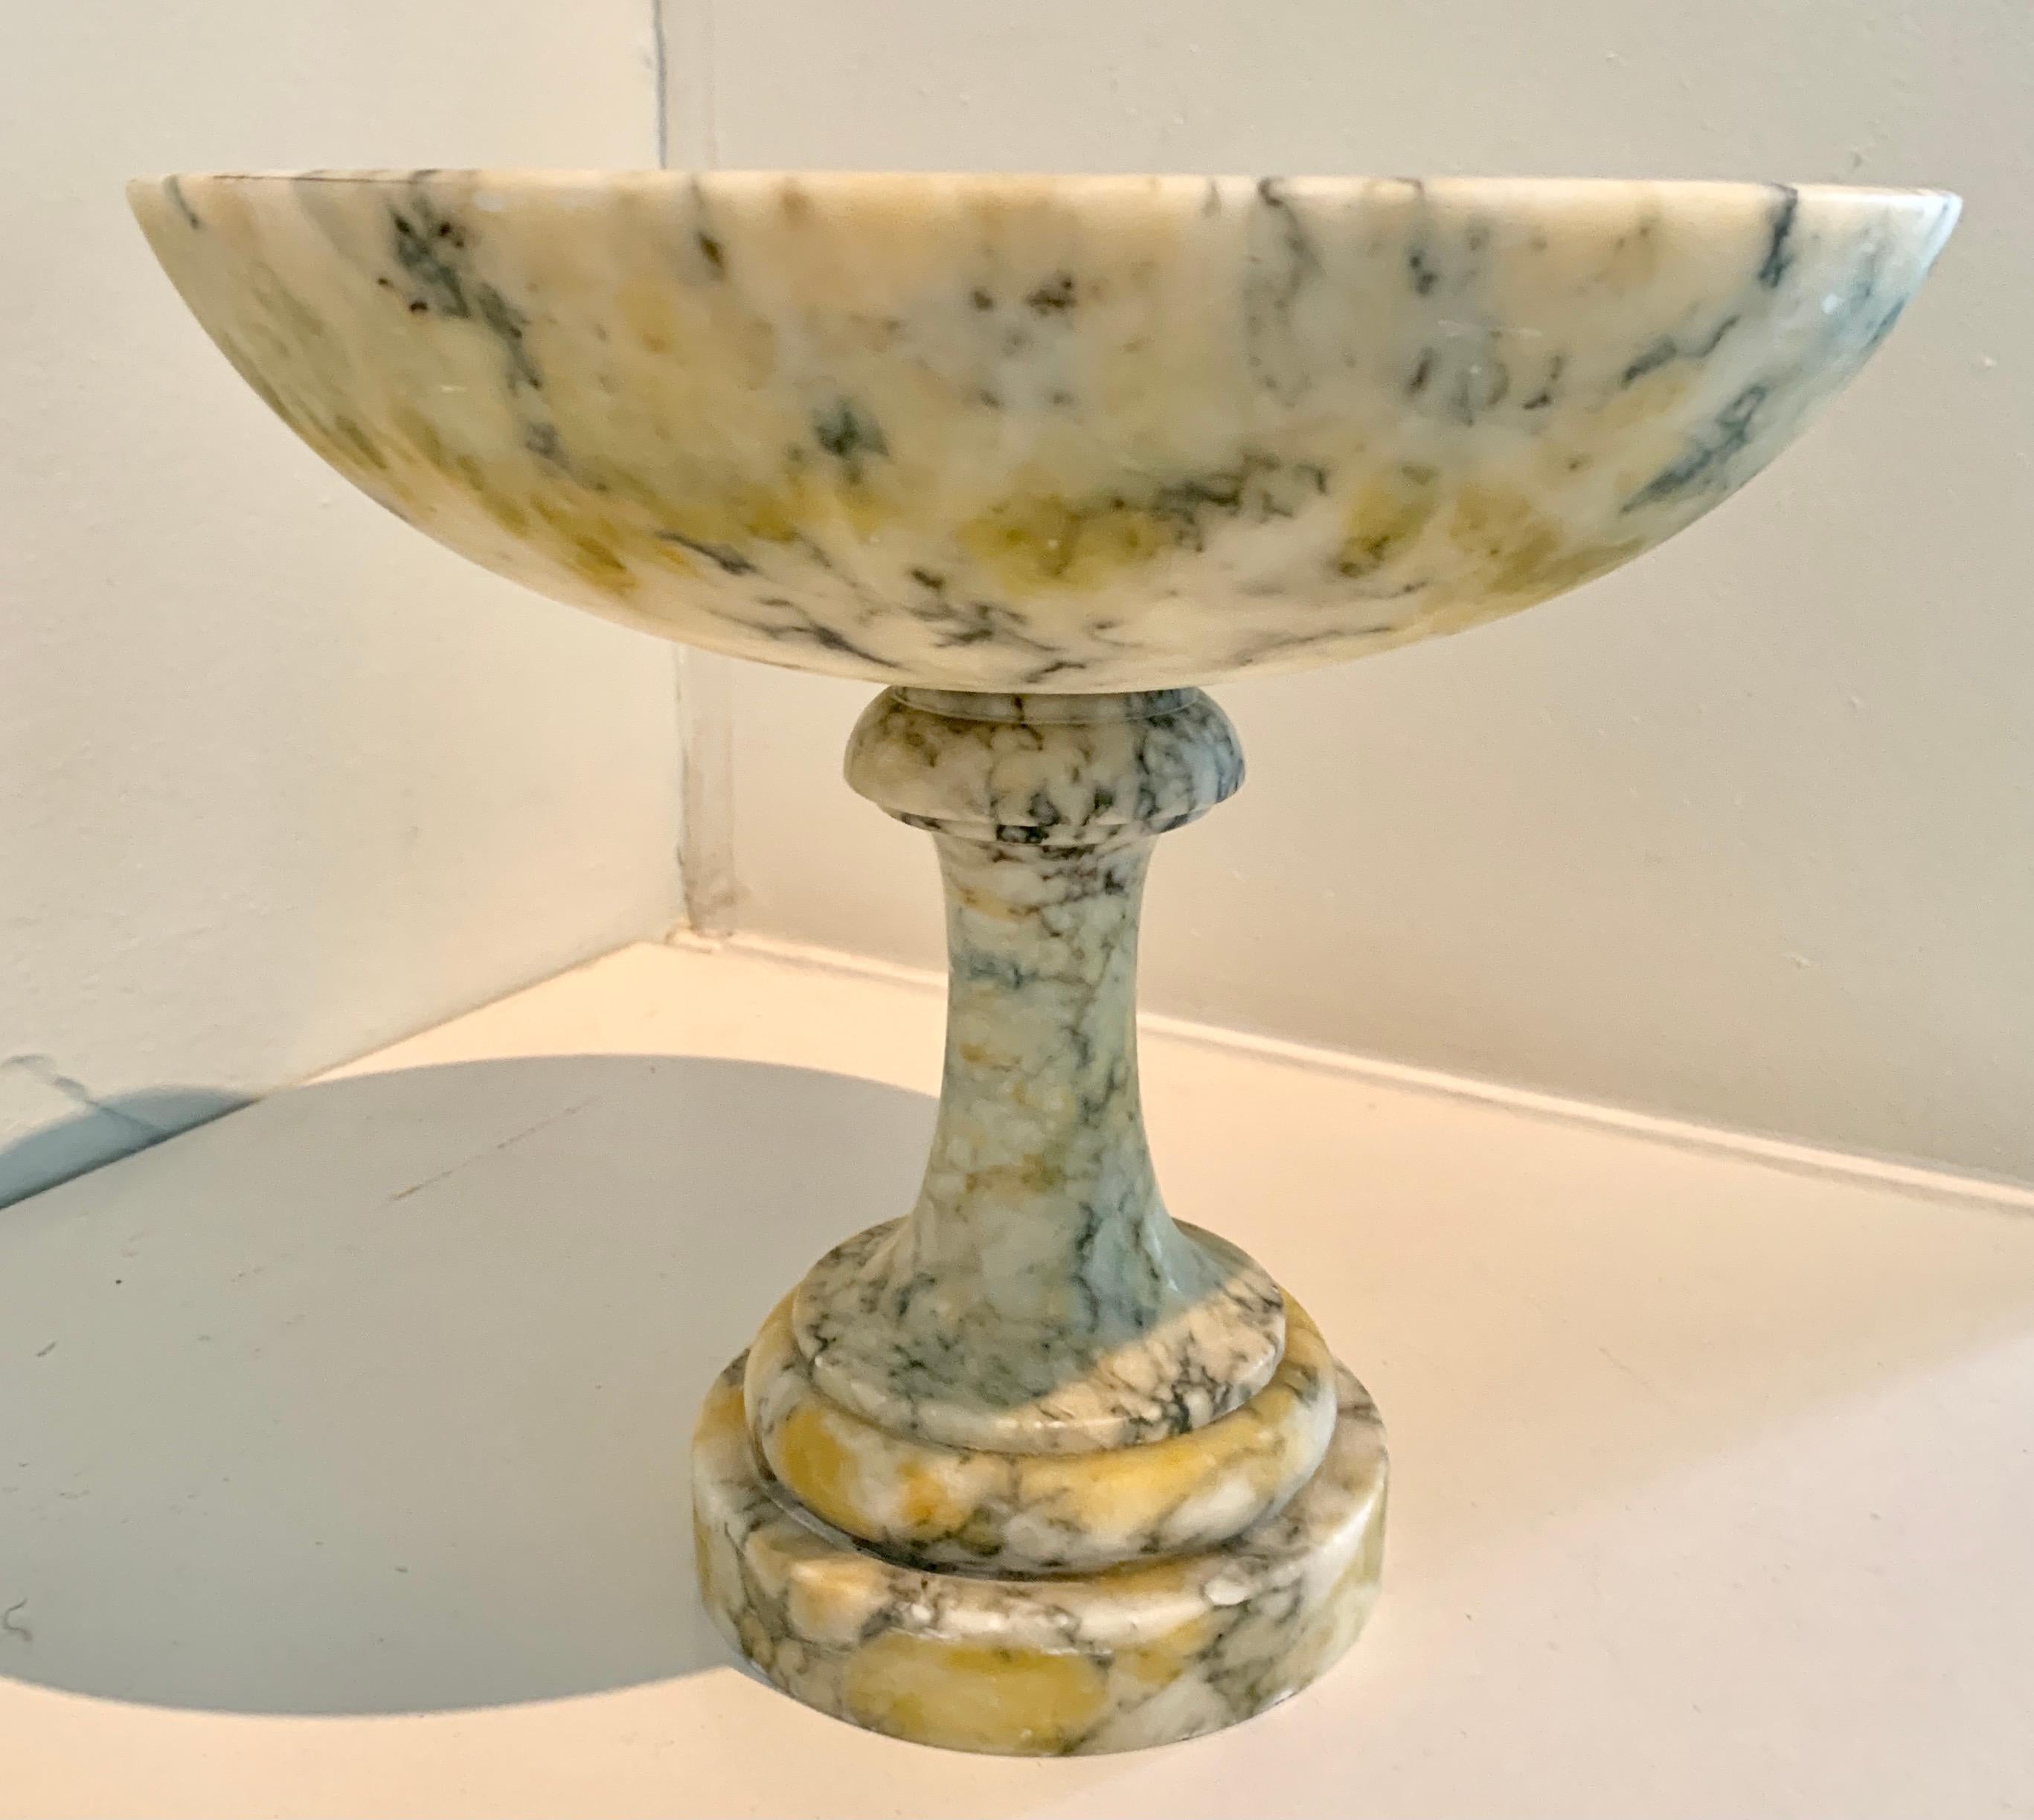 Marble or Alabaster footed compote. A handsome piece and perfectly suited for the kitchen, den or dining room, as a fruit bowl, center piece or purely decorative. A stunning and lovely addition.

 